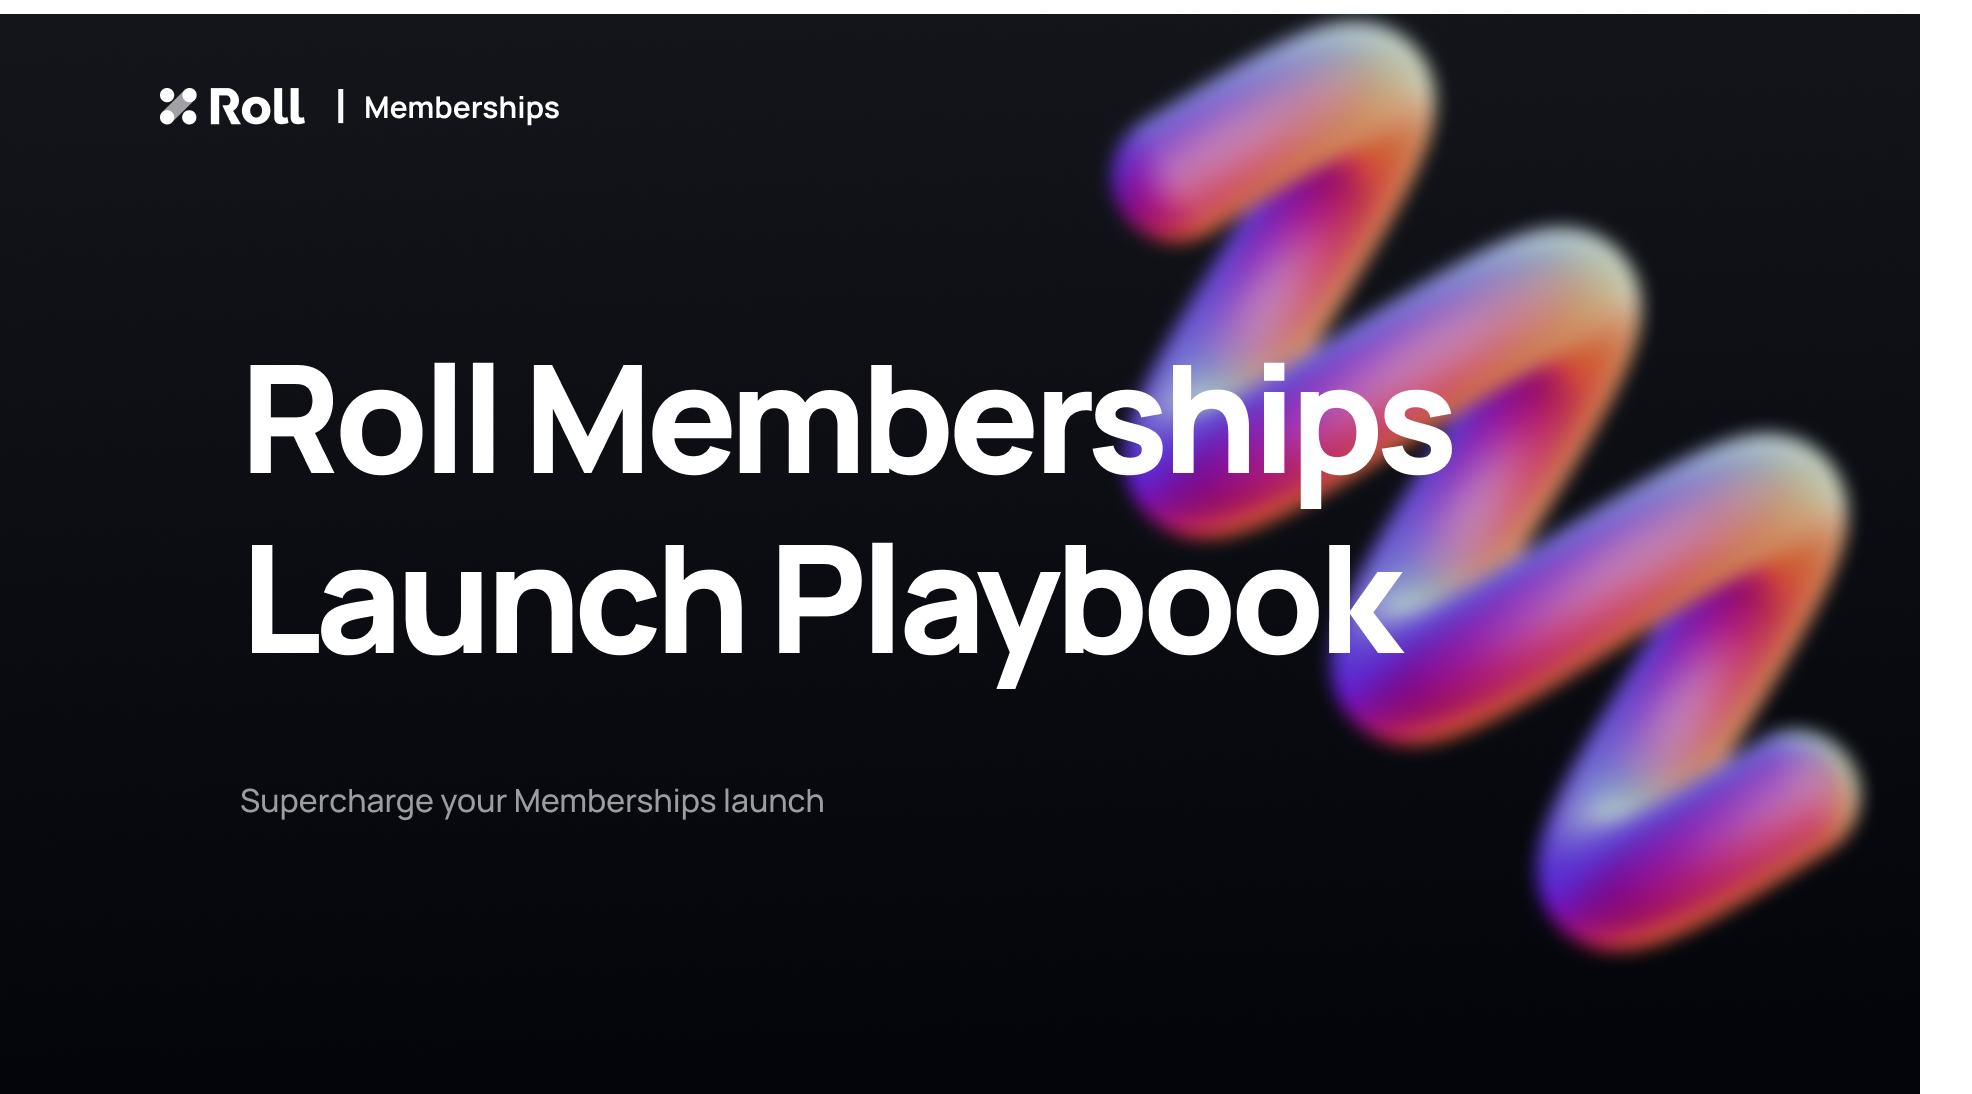 How to Launch Your Roll Memberships